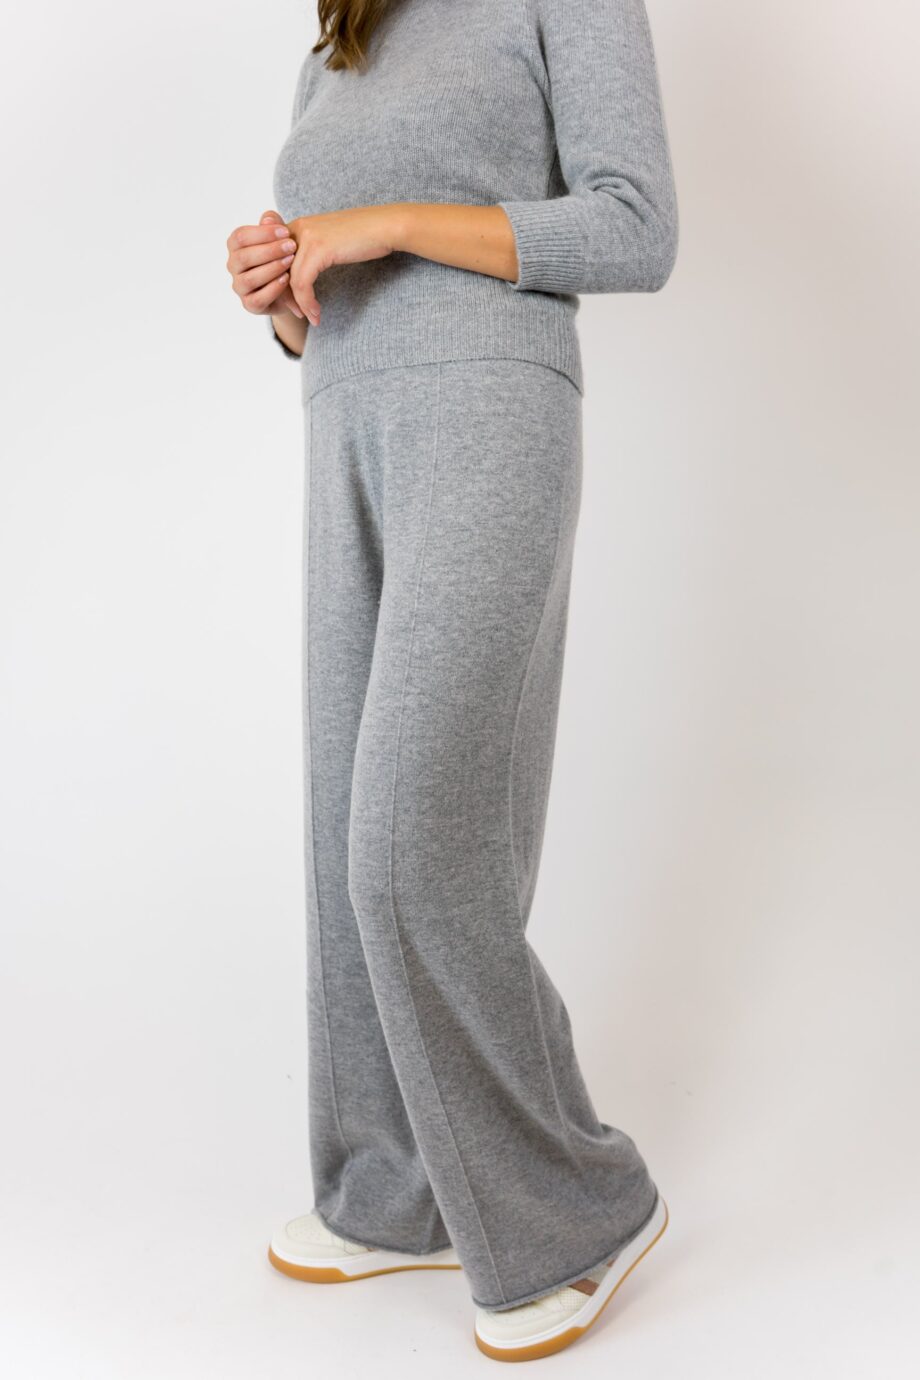 Allude grey pants side